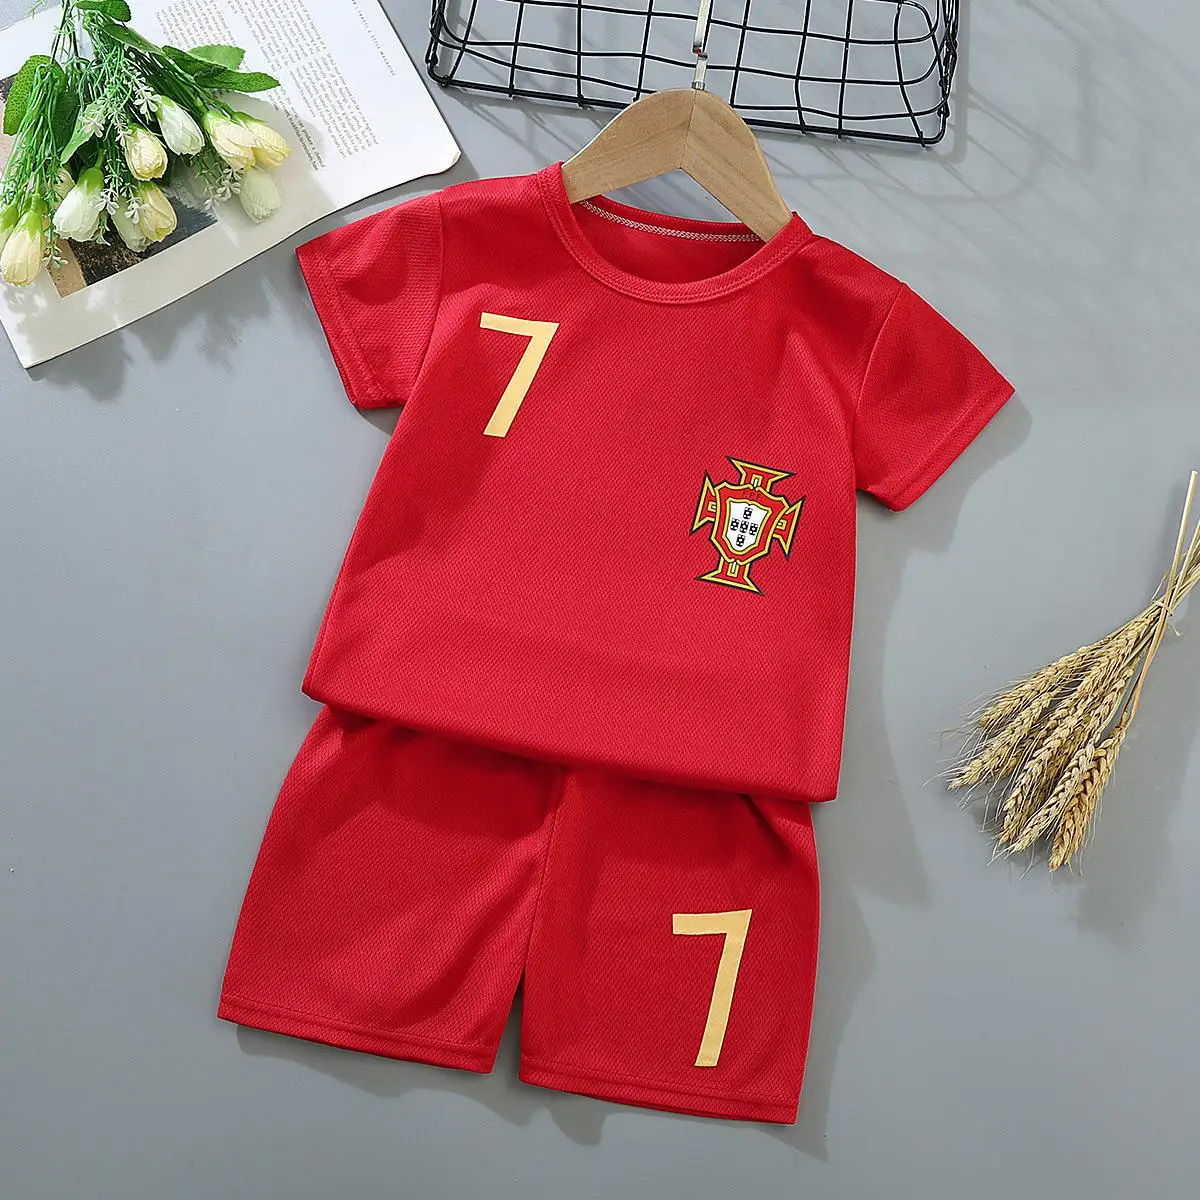 Children's Short-sleeved Suit Football Sportswear Casual Quick-drying Clothes Baby Boys Girls Summer Thin T-shirt Shorts Outfits barbie clothing sets	 Clothing Sets